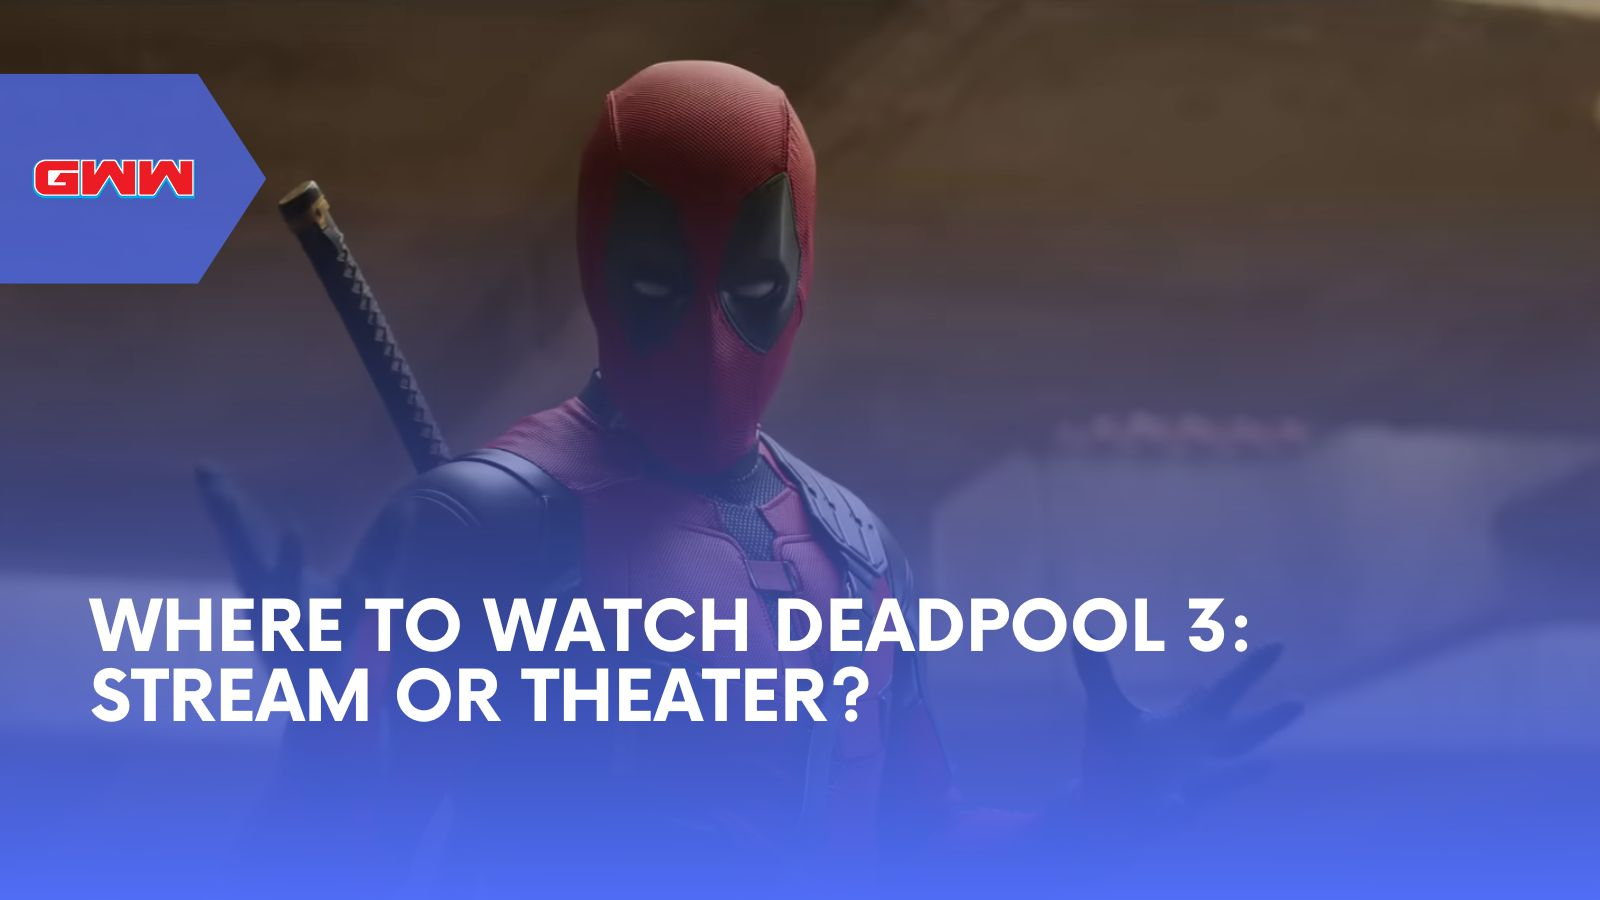 Where to Watch Deadpool 3: Stream or Theater?